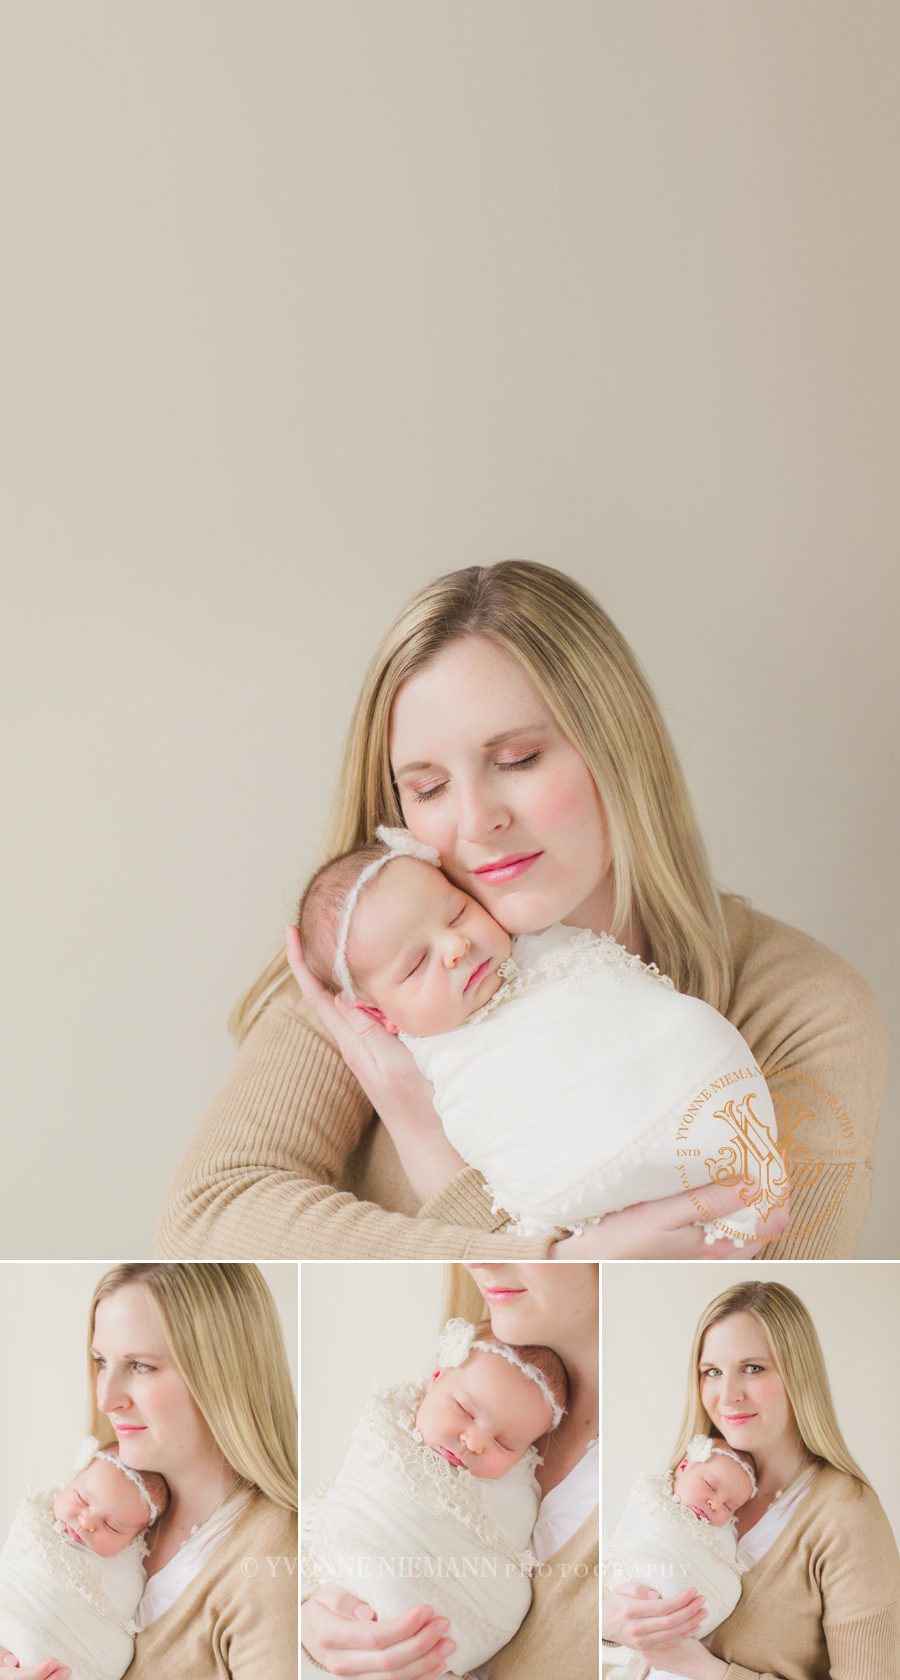 Pure photos of mother and infant girl taken by Athens, GA photographer, Yvonne Niemann Photography.